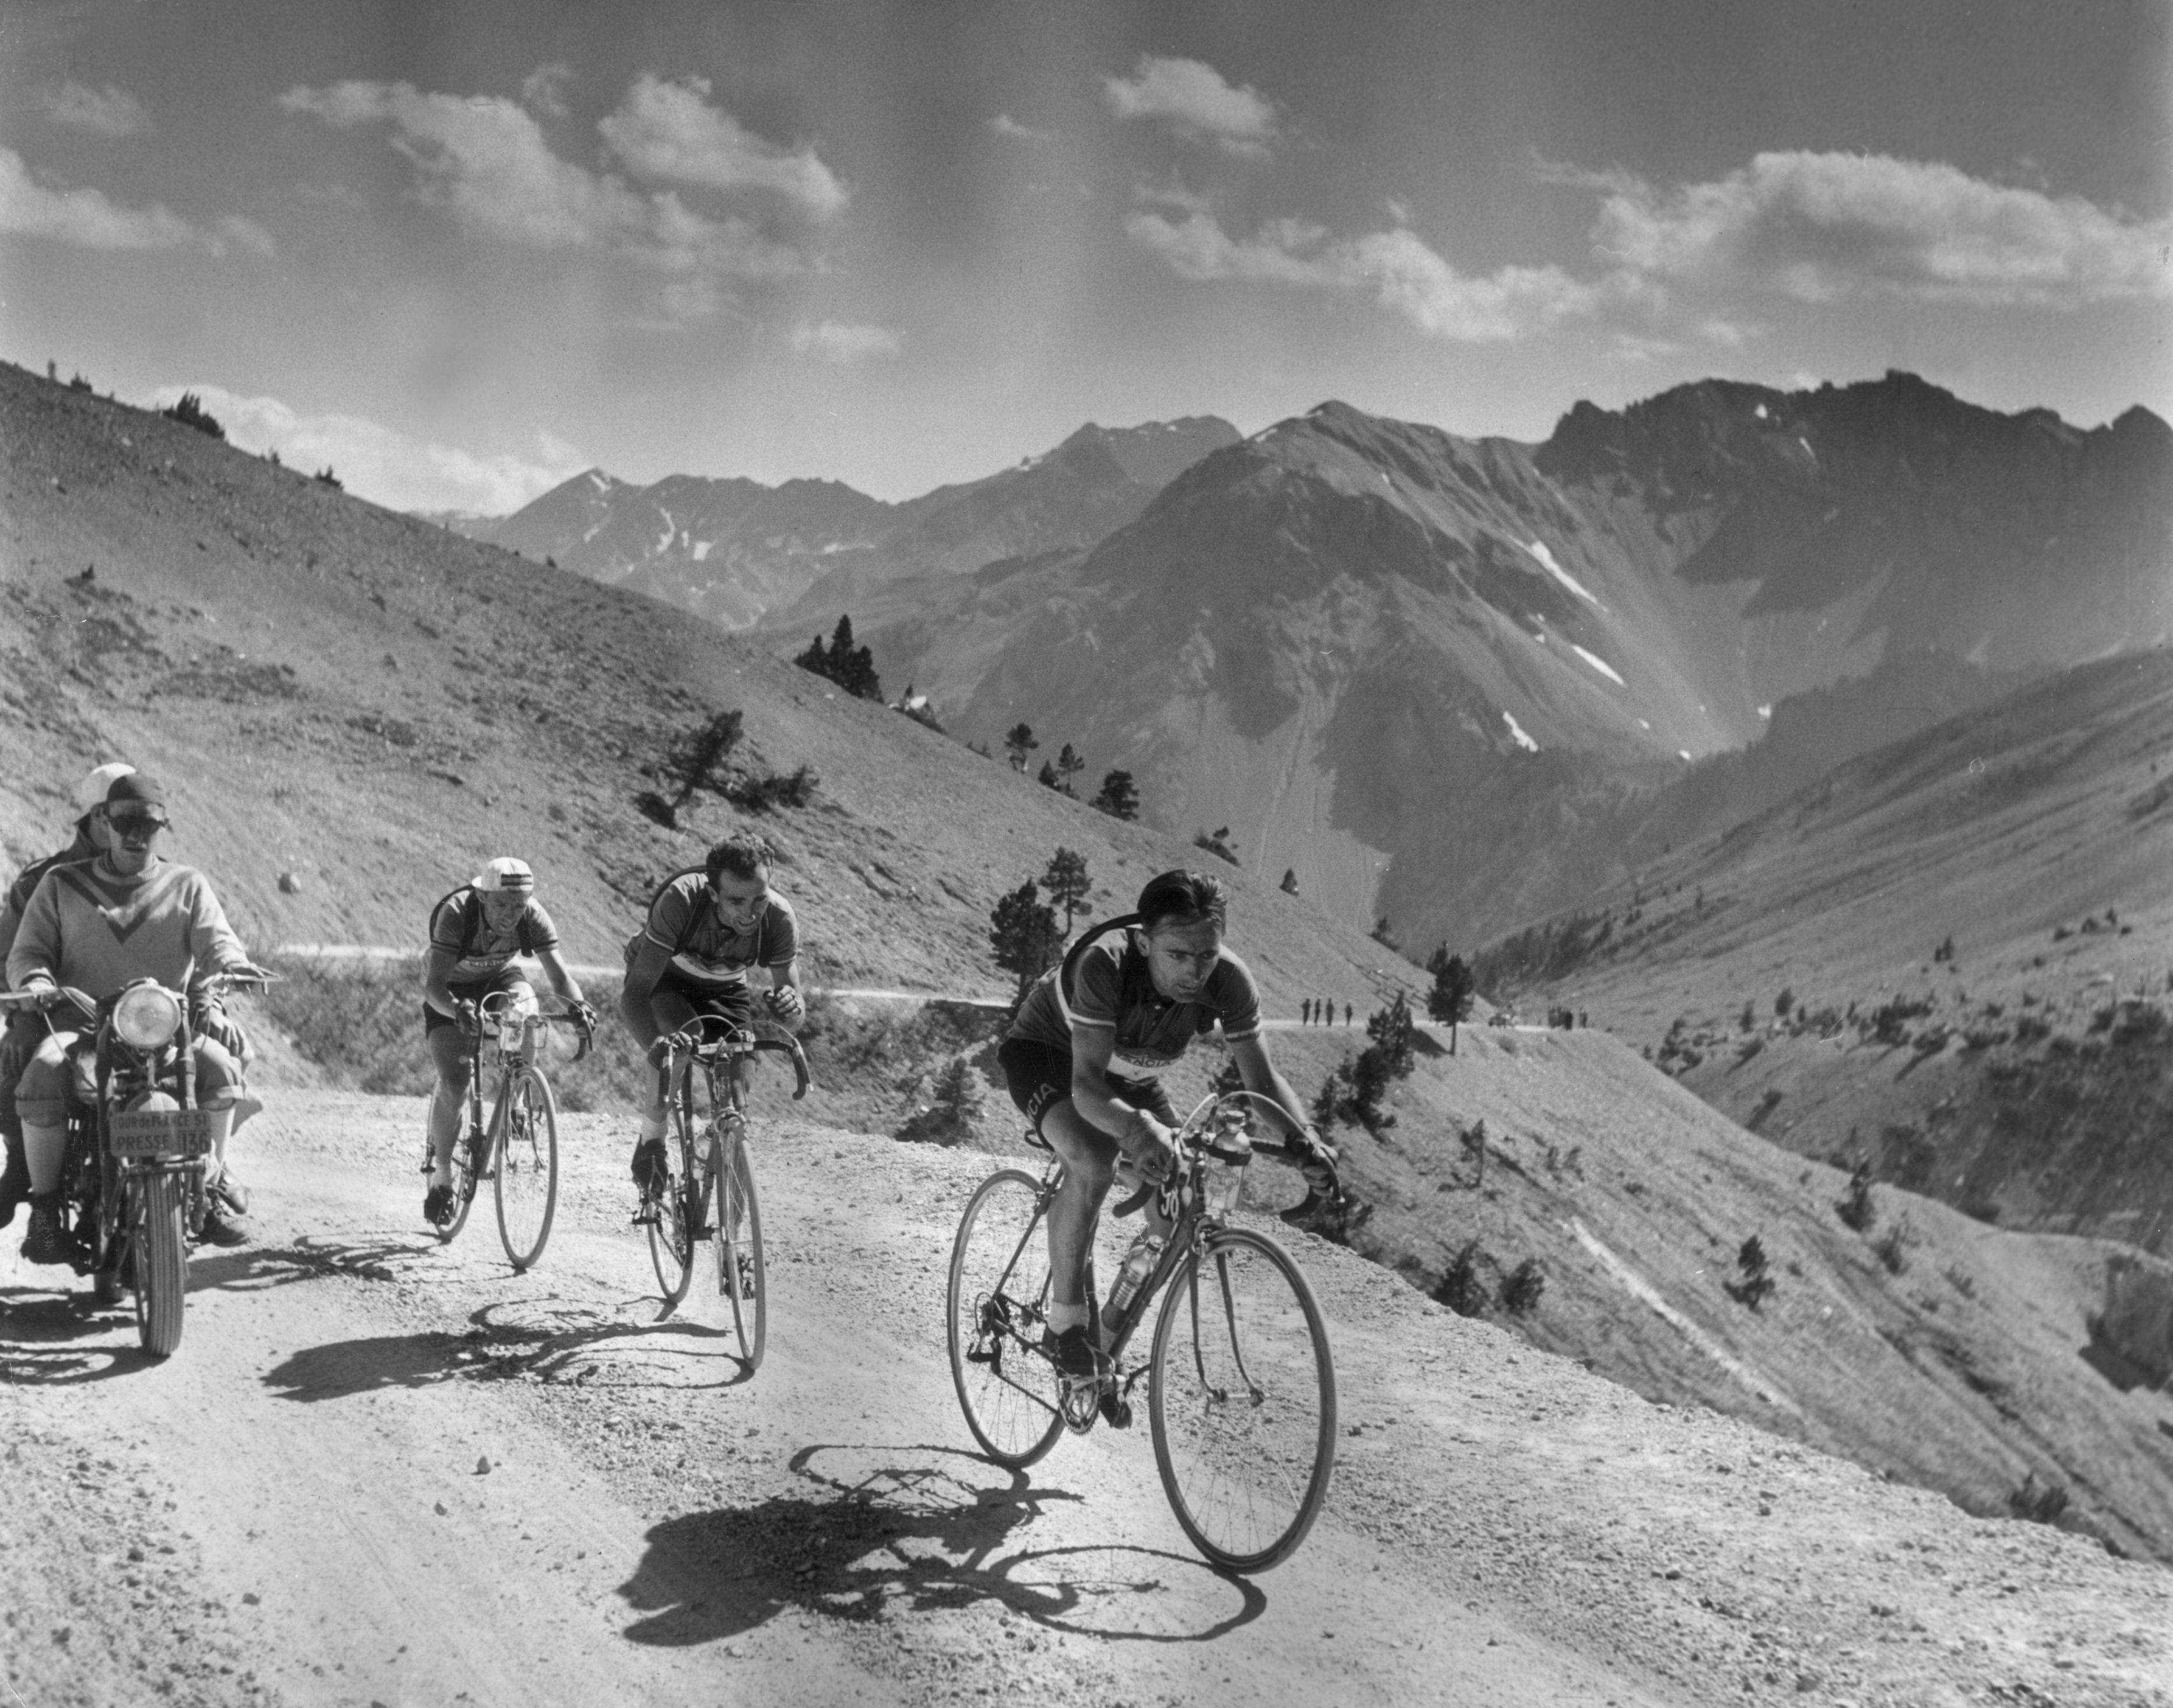  Bert Hardy 'Mountain Stage' Tour de France Limited Edition Photograph 20x24